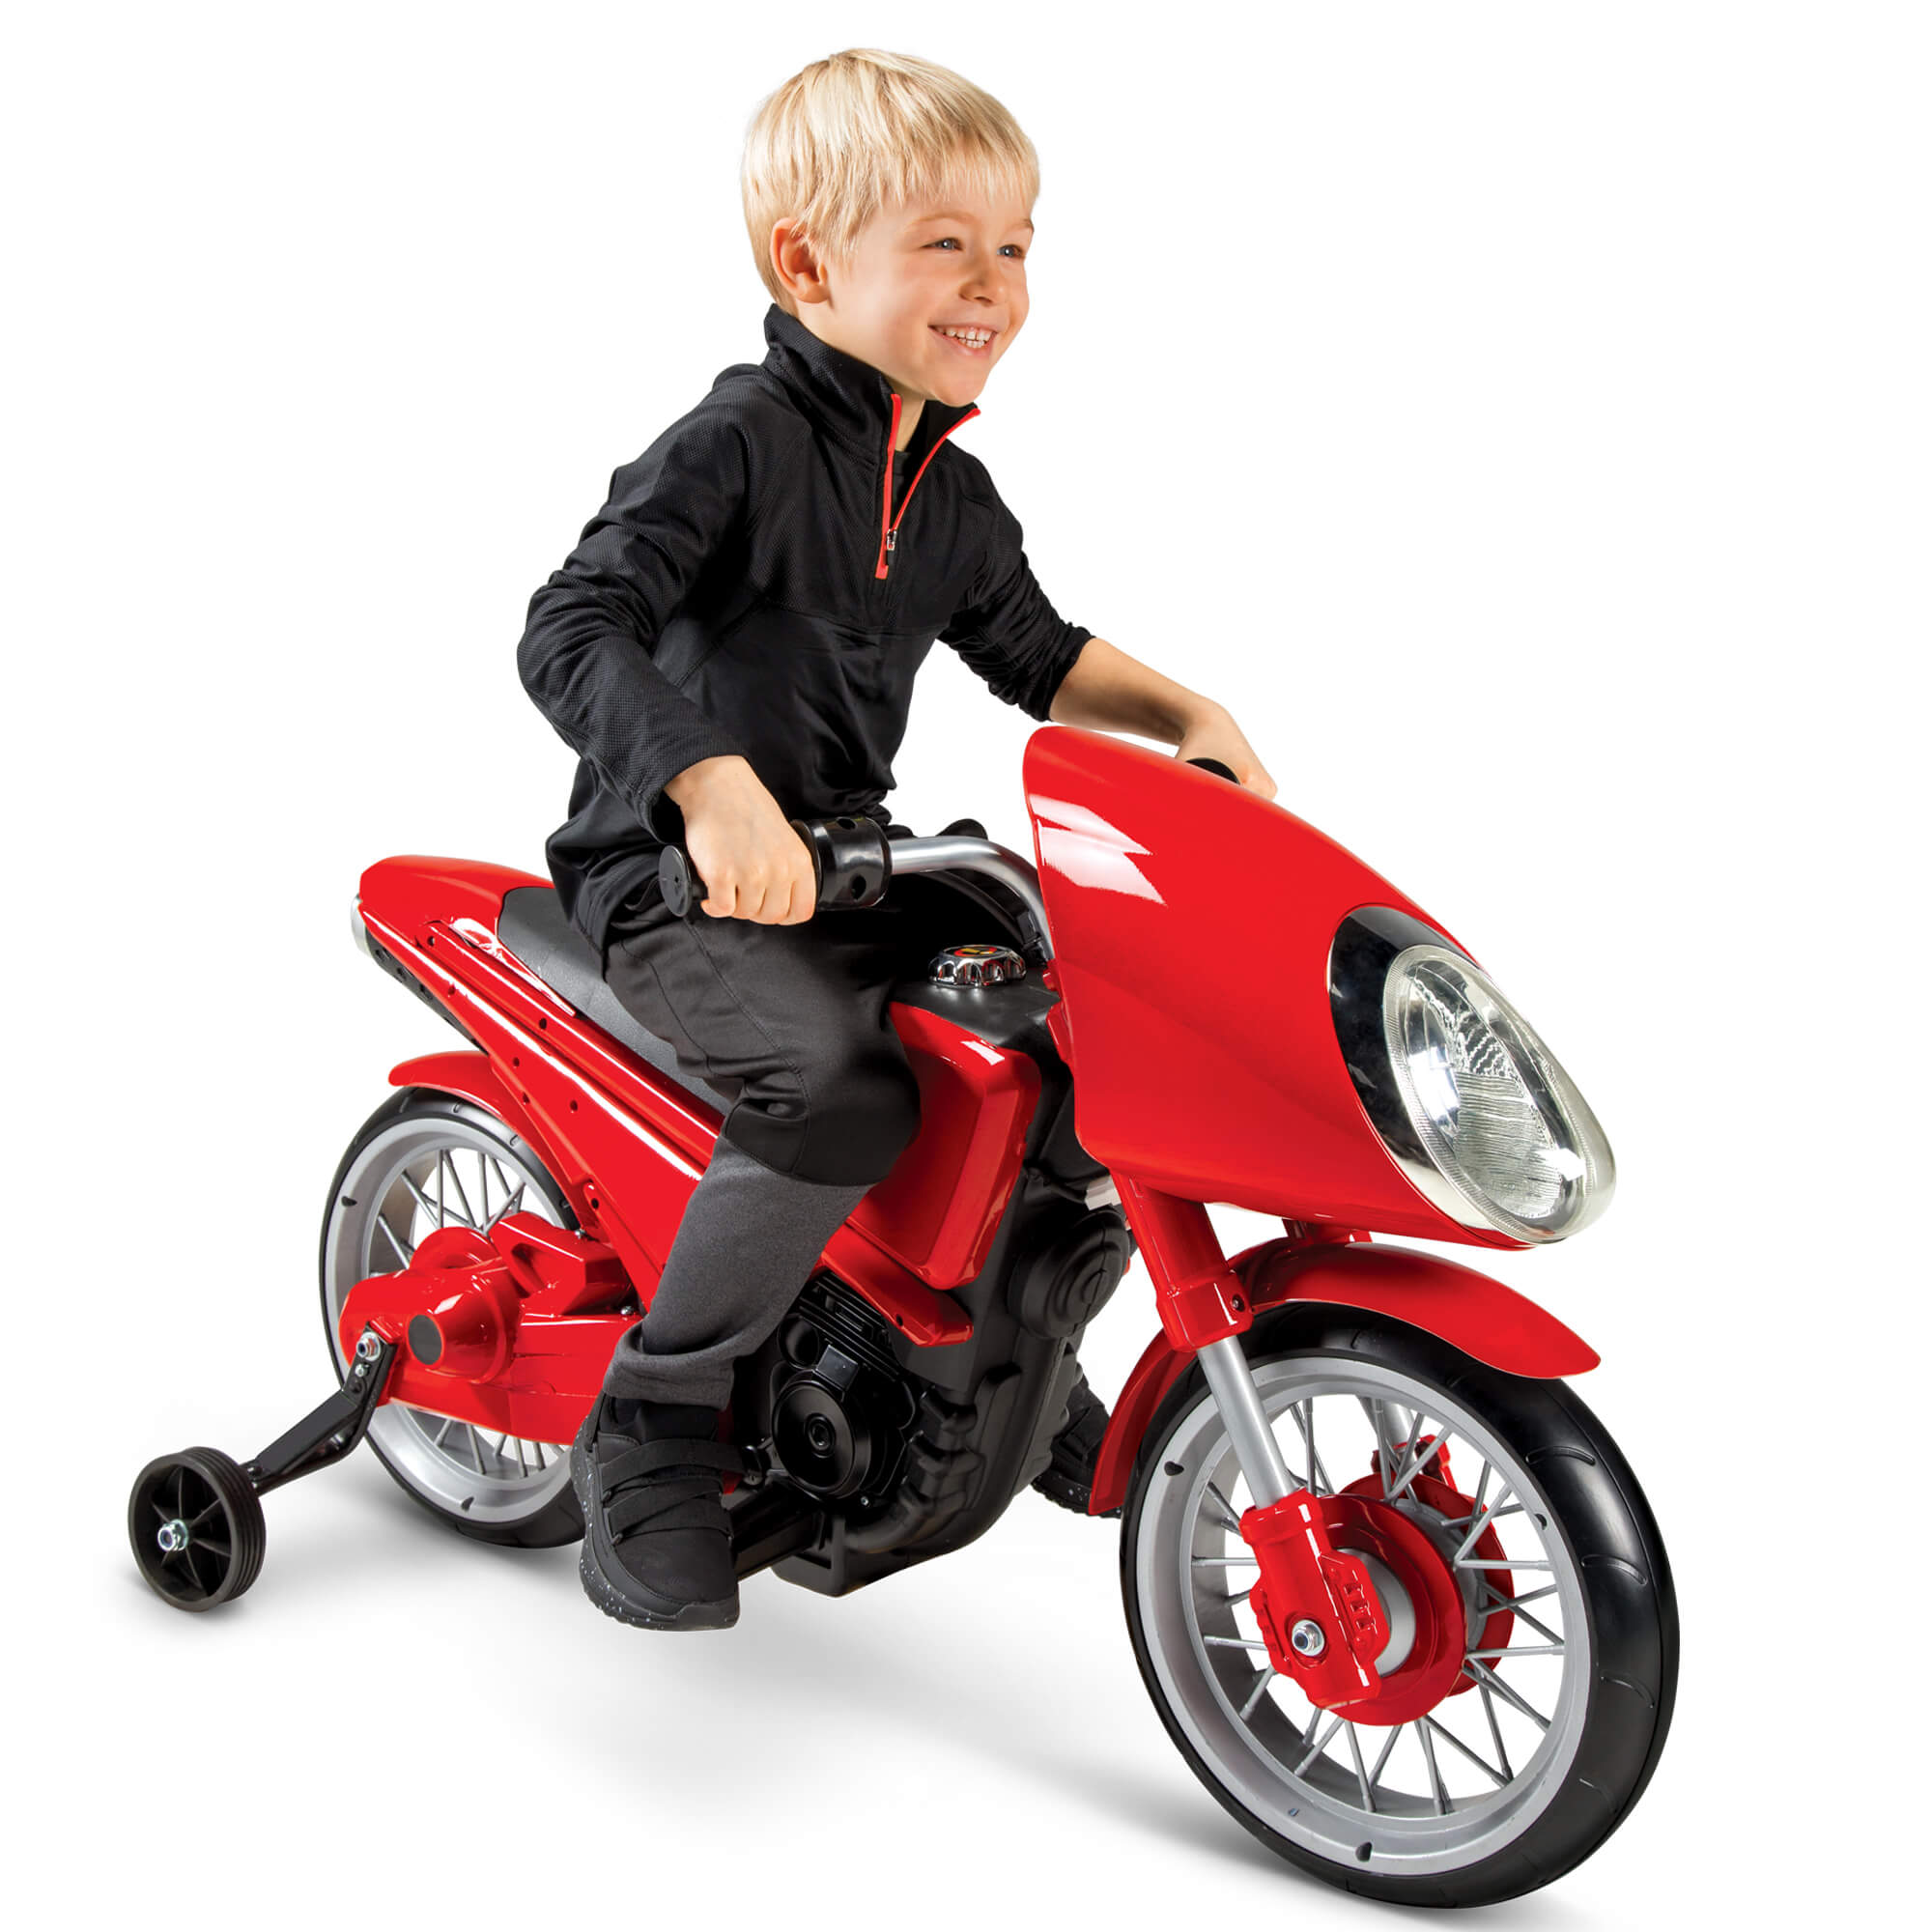 Disney/Pixar Incredibles 2 Elasticycle 6-Volt Battery-Powered Ride-On by Huffy - image 3 of 10